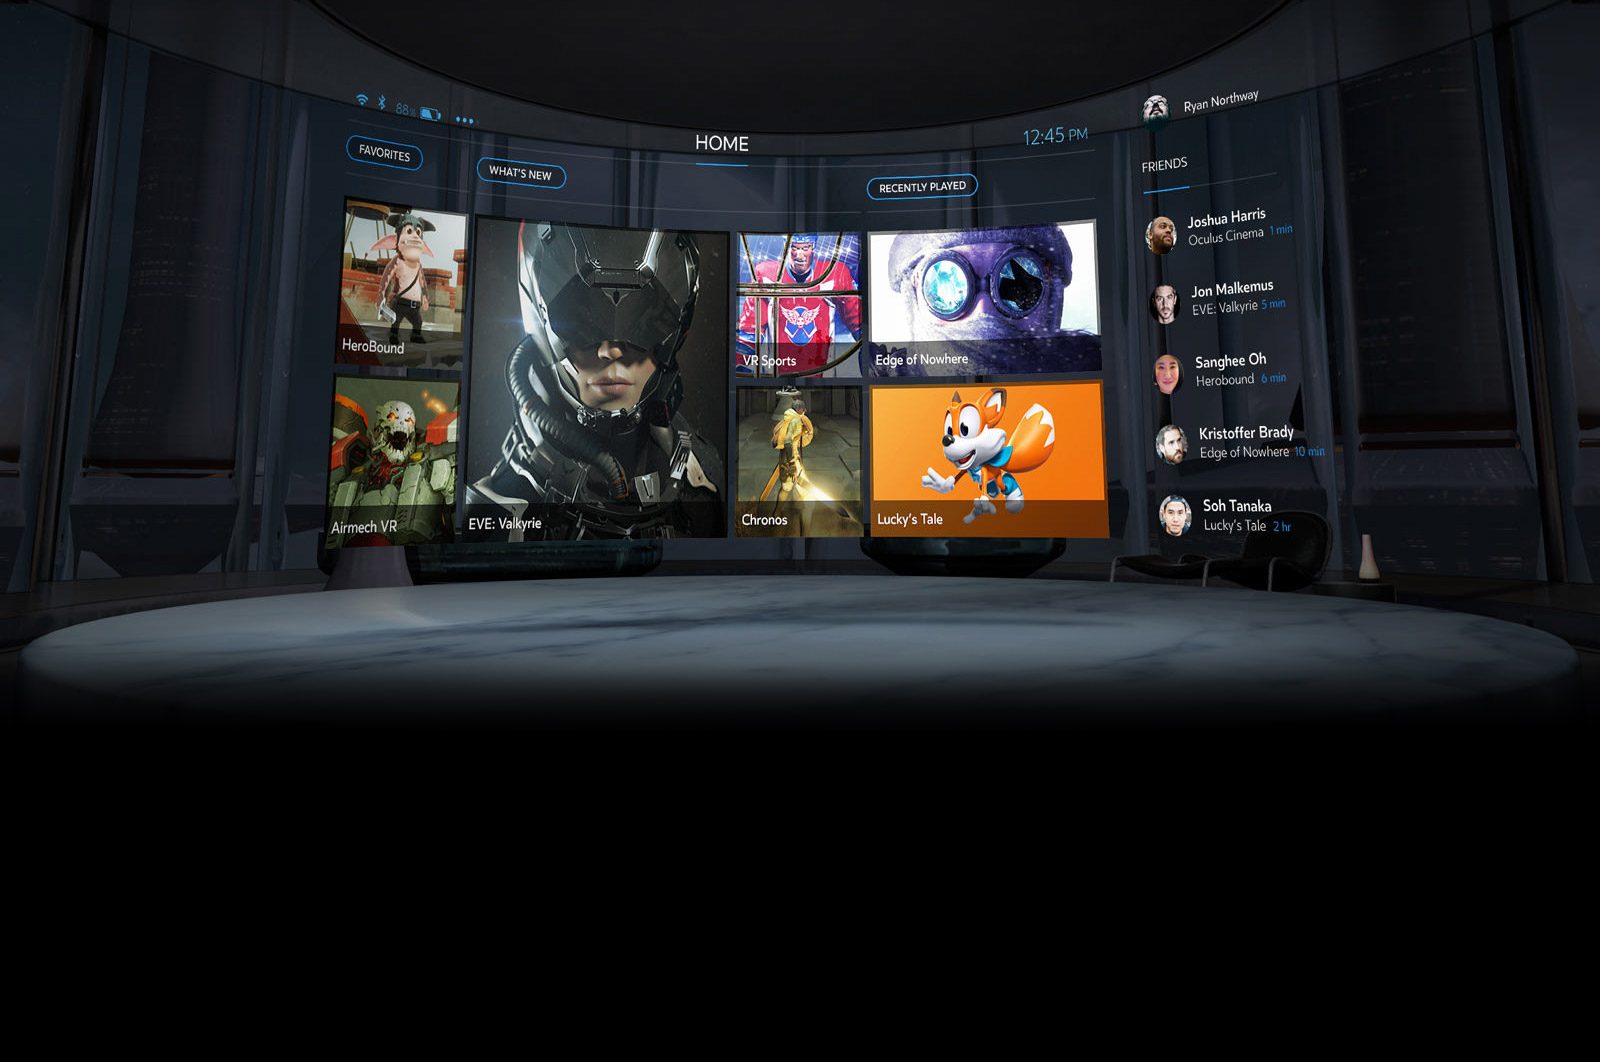 oculus home store